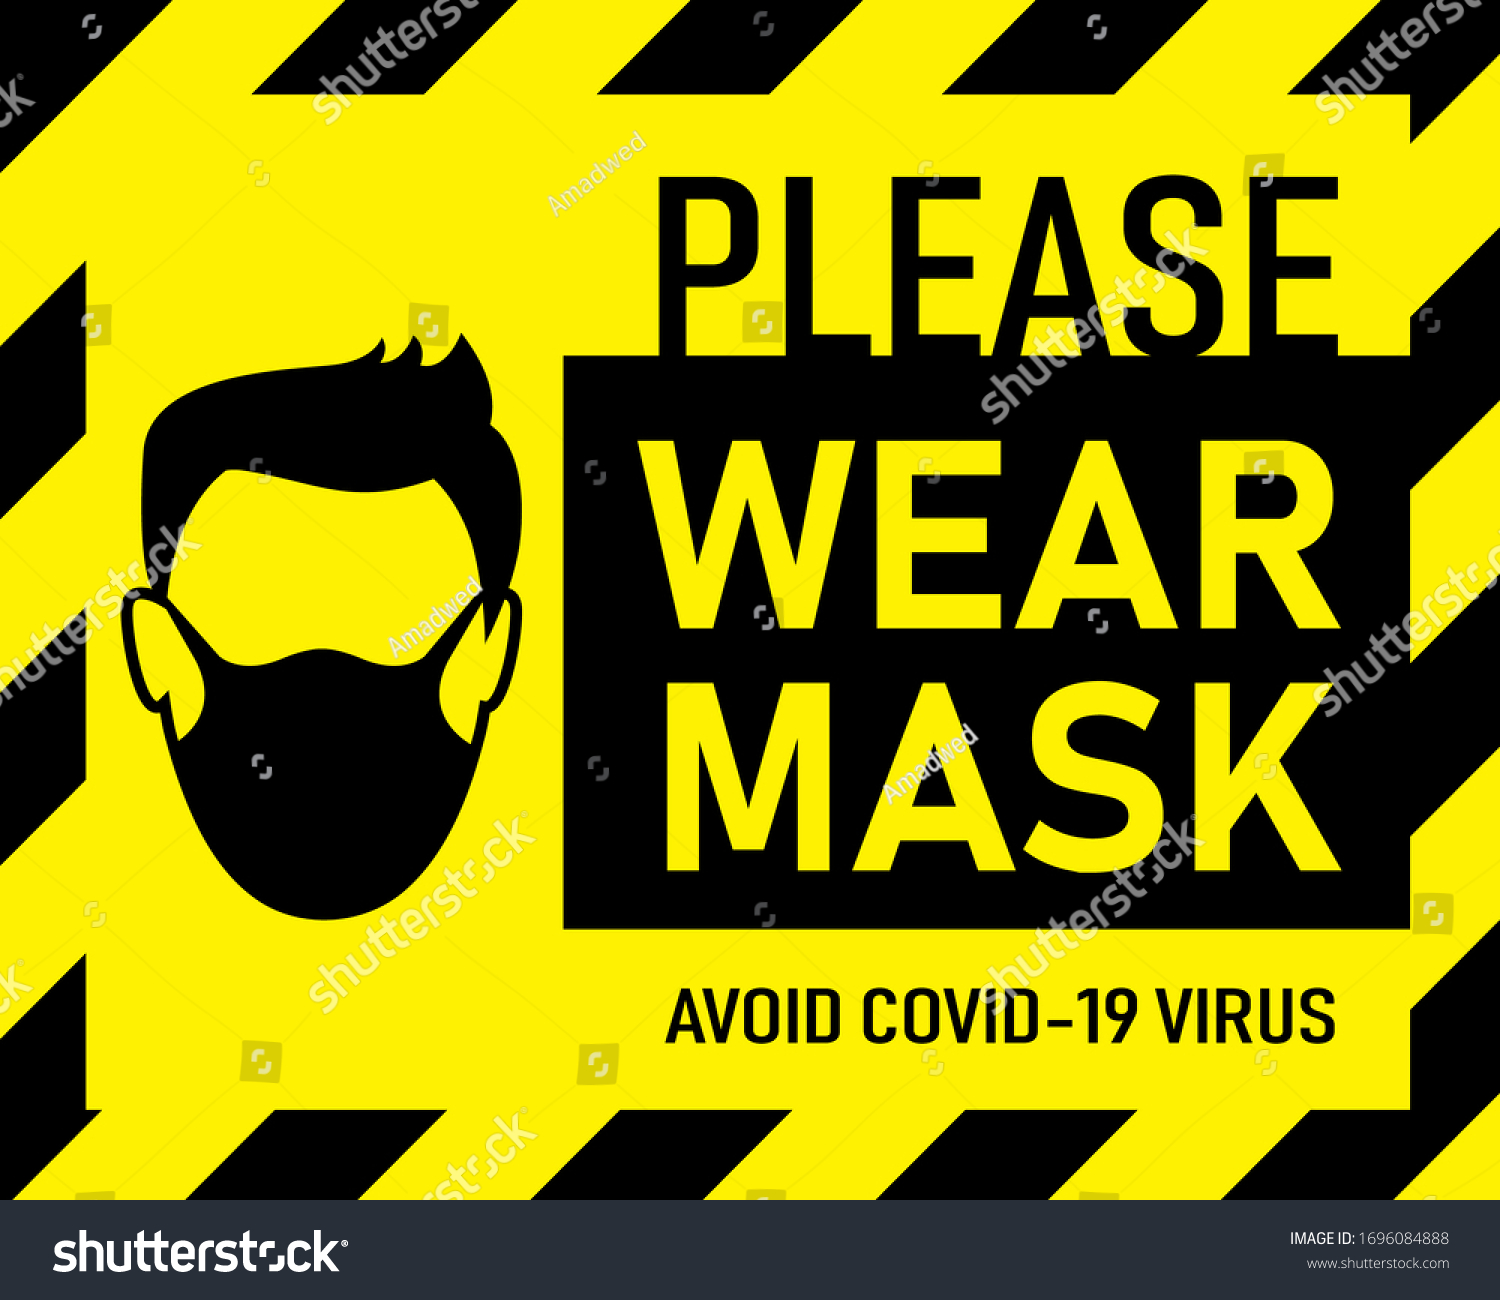 Vector attention sign, please wear mask avoid covid-19 virus black color on yellow background. warning or caution sign. #1696084888